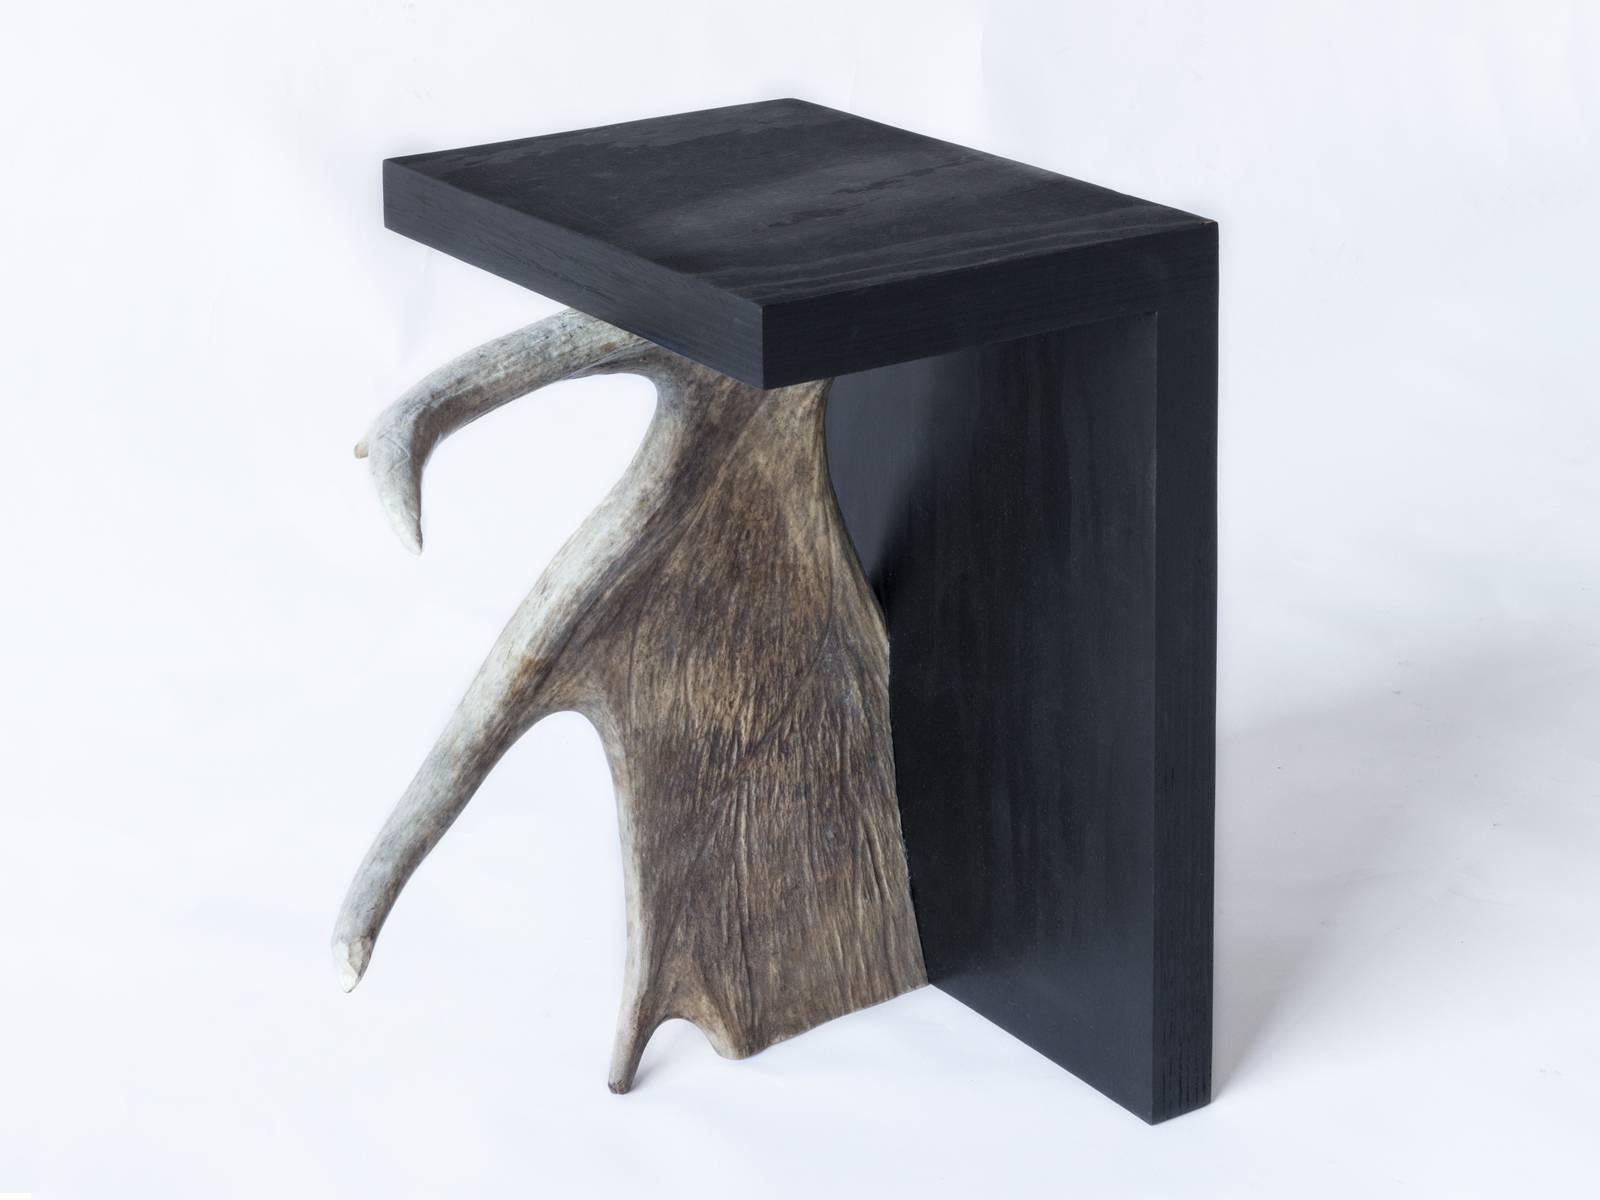 Rick Owens stag T stool in black available from LMD/studio.

Drawing from such art and design movements as Formalism and Minimalism, this sculptural stool by Fashion Designer Rick Owens is an essential accent for every contemporary interior. The